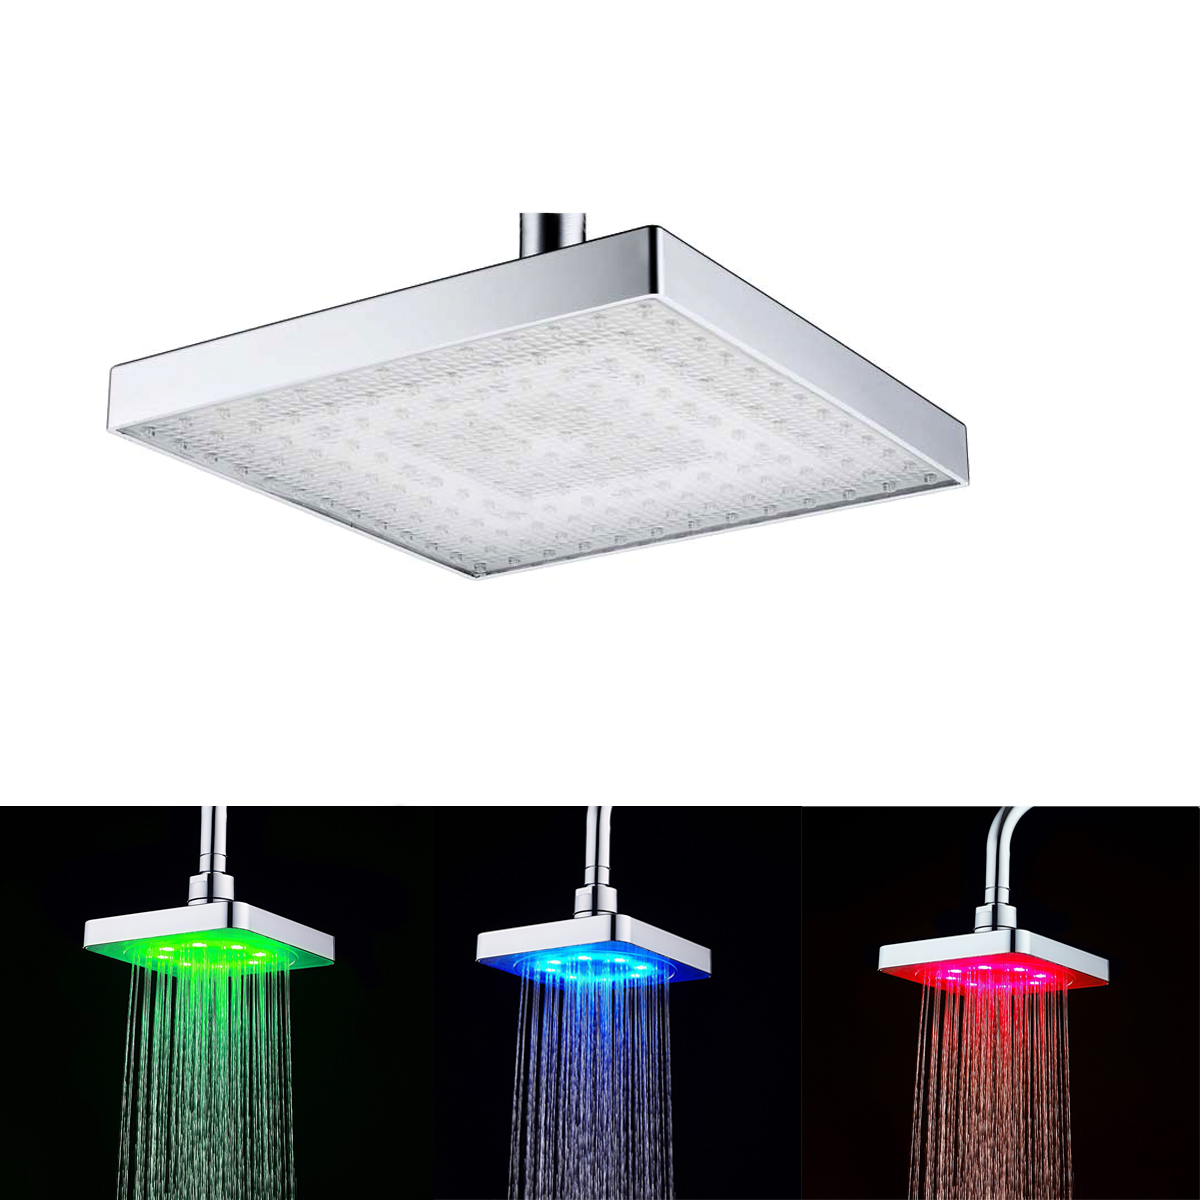 360deg-Adjustable-Chrome-Water-Temperature-Controlled-Multi-Color-LED-Shower-Head-1296624